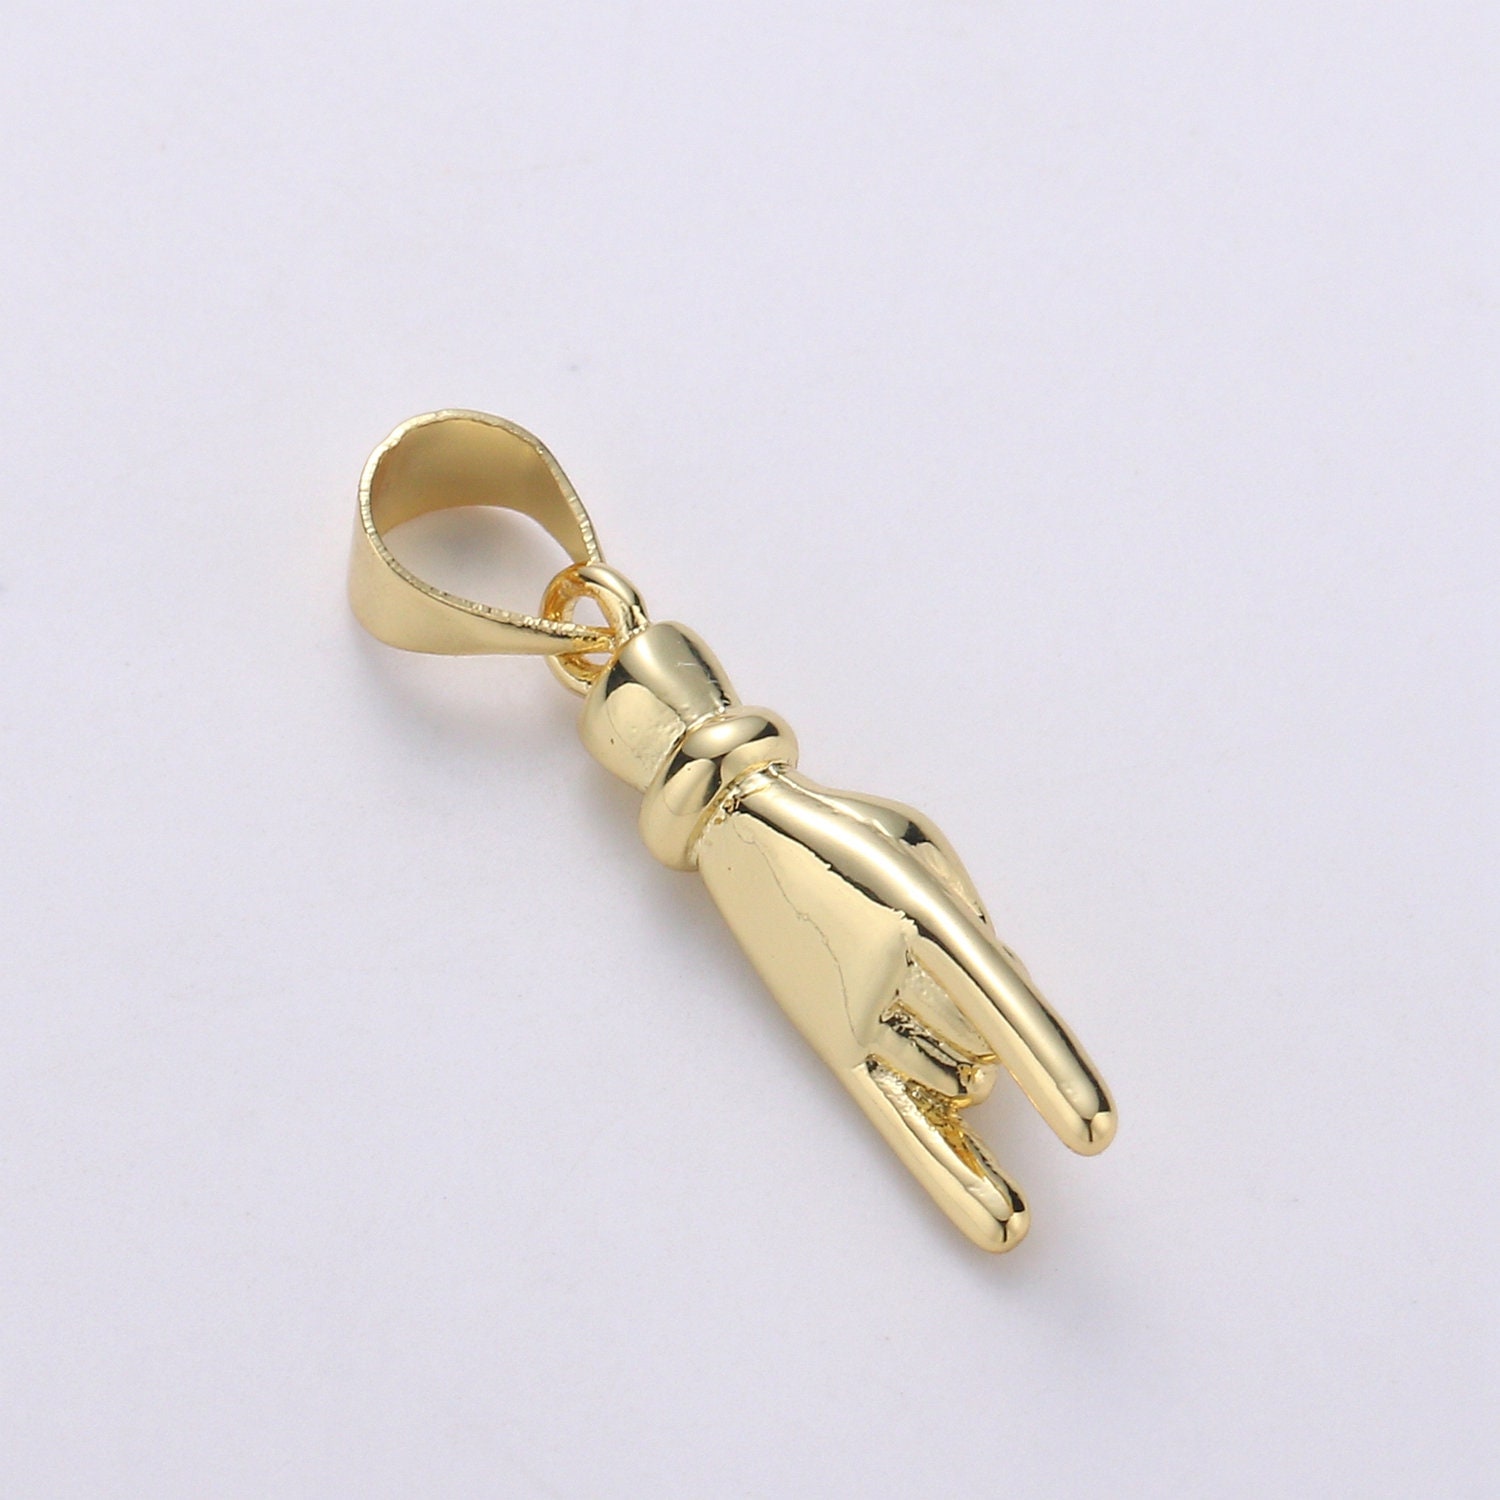 Hand Gesture Charm Gold  Hand Sign Charm 18K Gold Filled  OK Hand Sign Charm Pendant Ok Hand Sign Charm 19x9mm CP1114